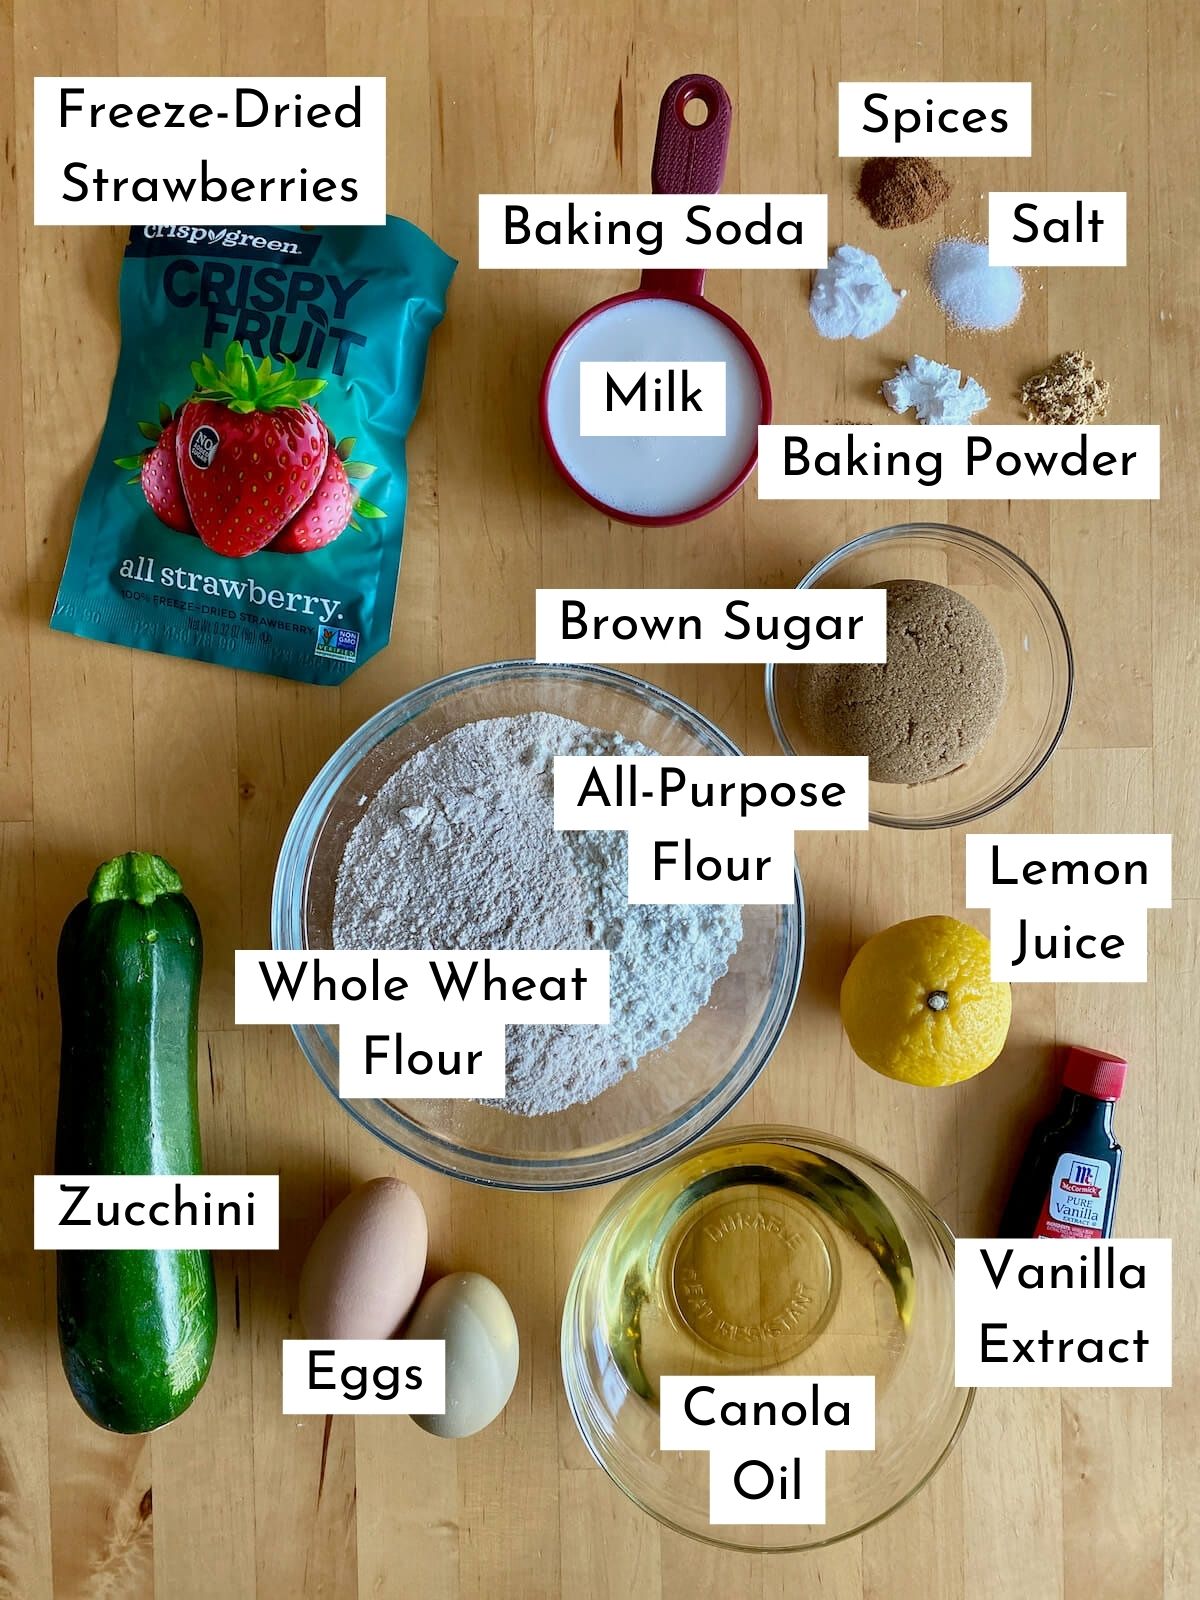 The ingredients to make strawberry zucchini bread on a butcher block counter. Each ingredient is labeled with text describing what it is. They include freeze-dried strawberries, baking soda, slices, salt, milk, baking powder, brown sugar, all-purpose flour, whole wheat flour, zucchini, lemon juice, eggs, canola oil, and vanilla extract.